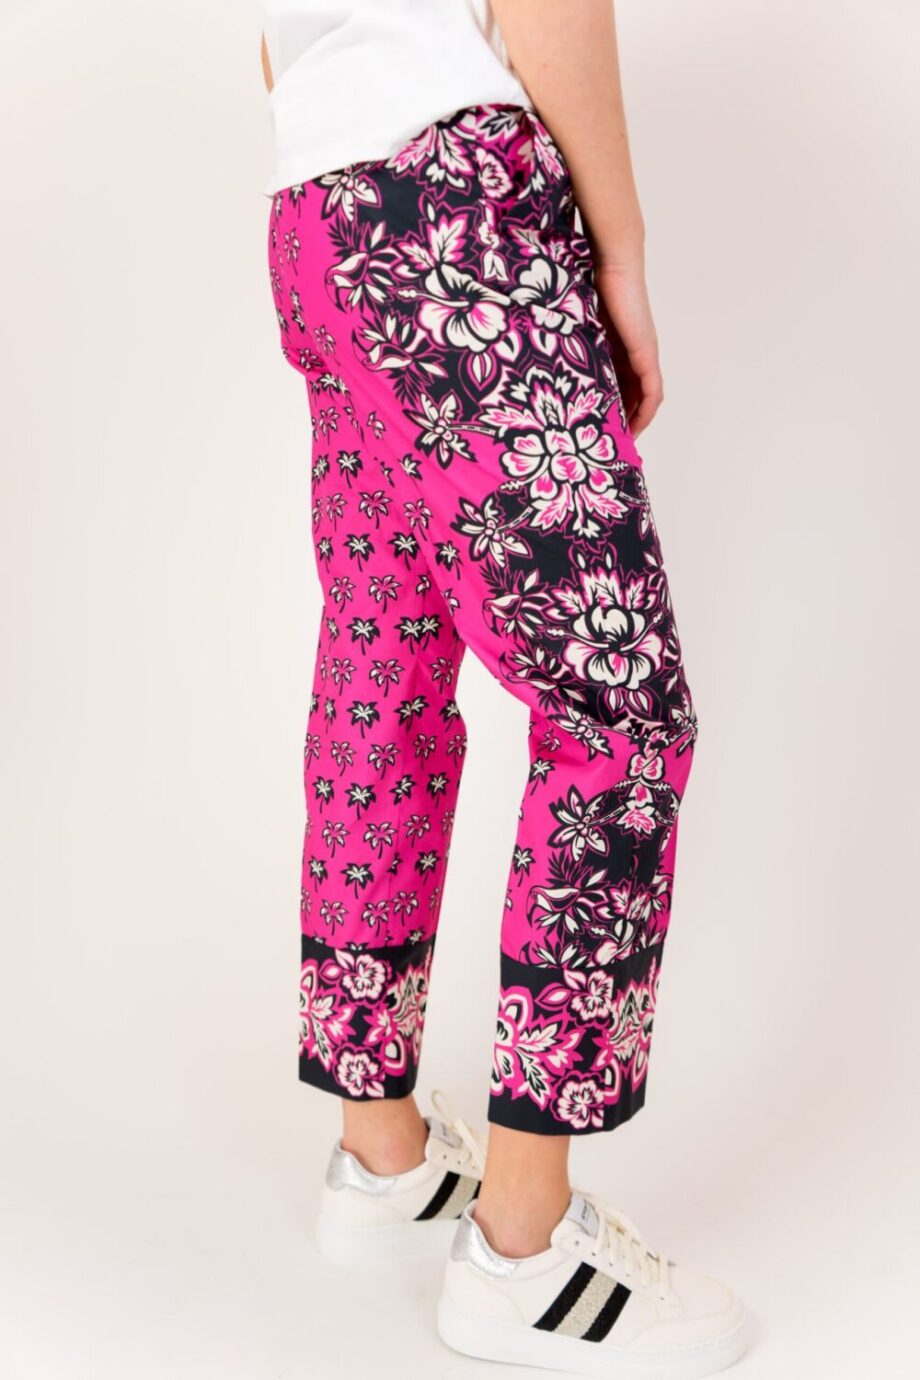 Red Valentino pink trousers side